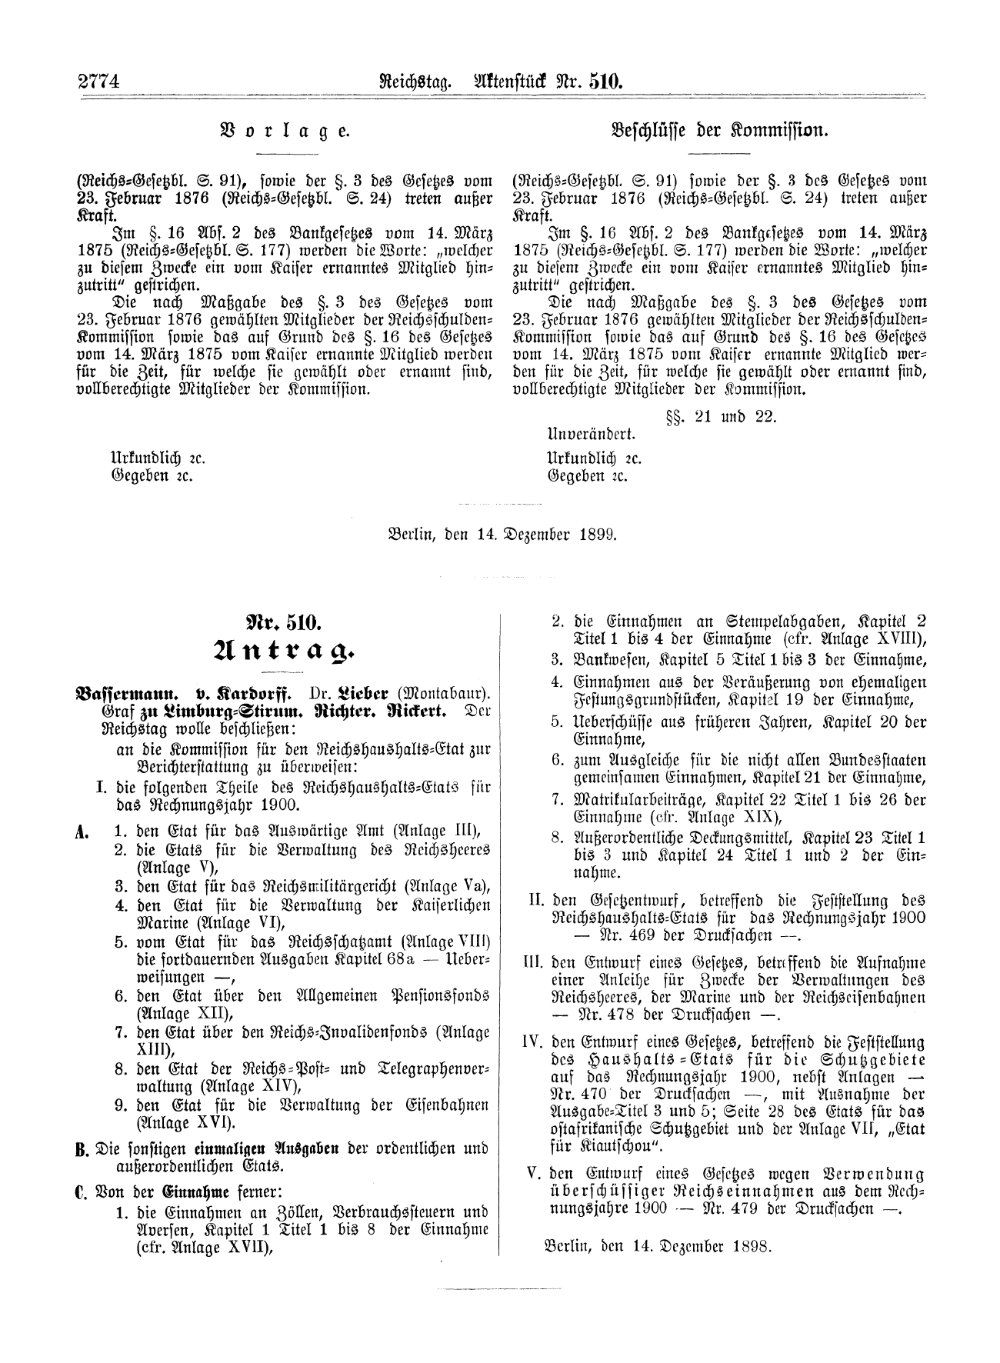 Scan of page 2774